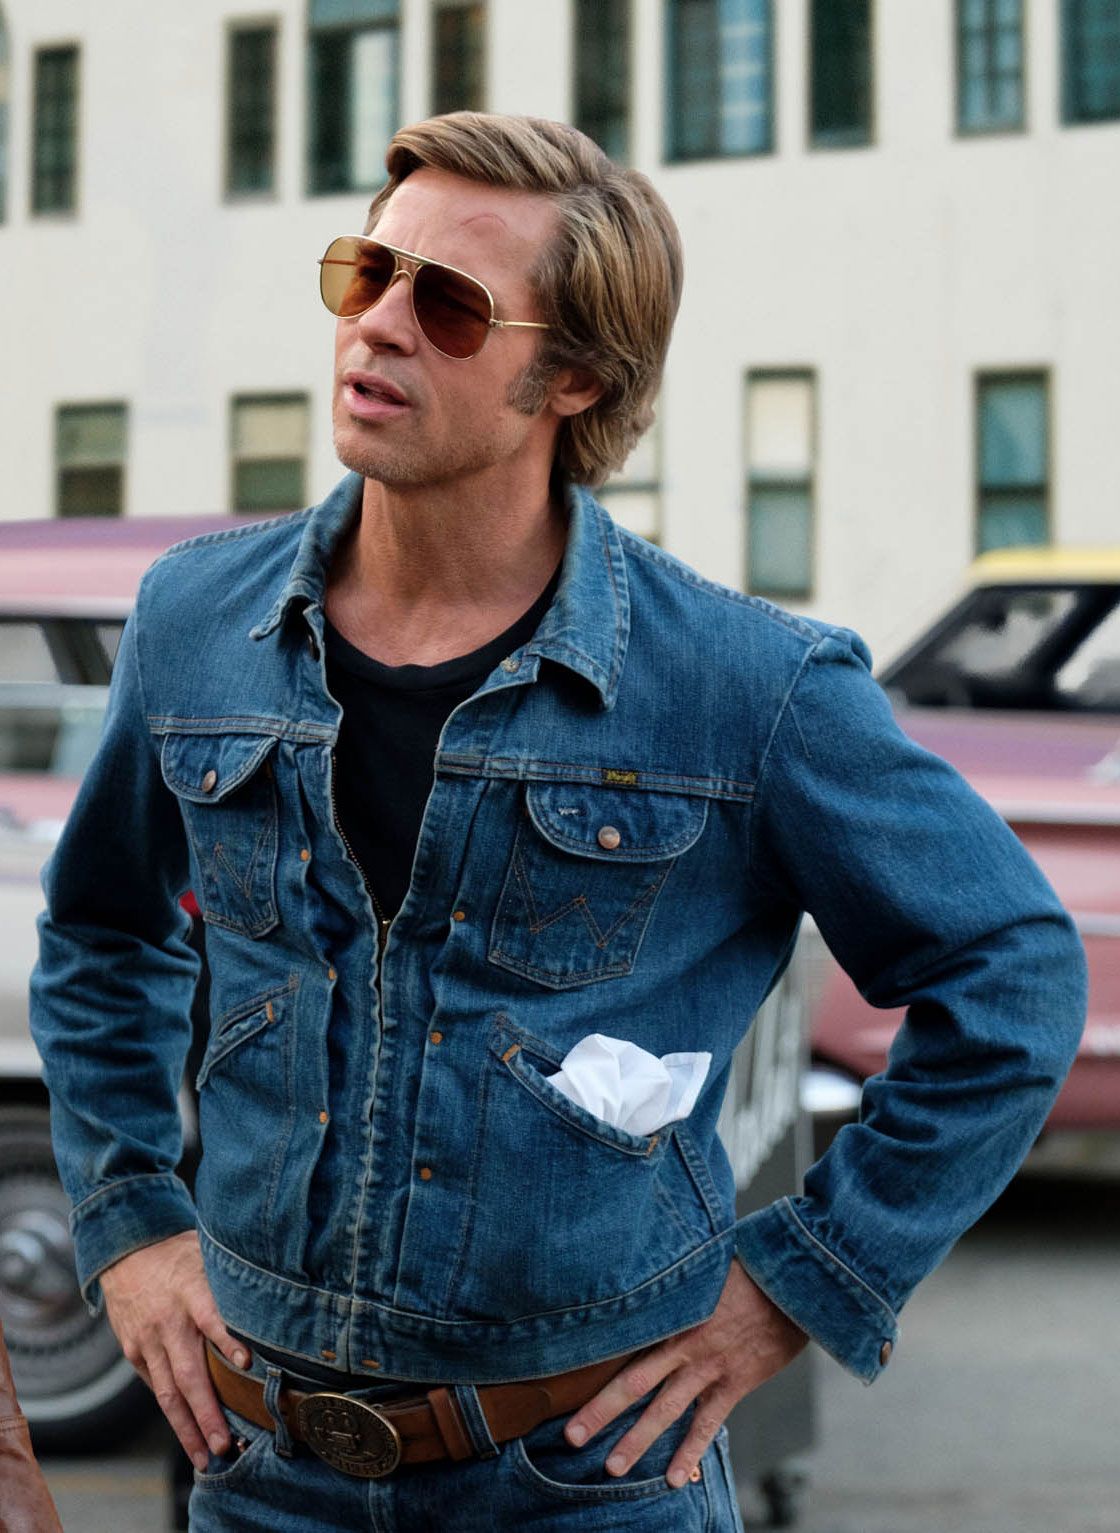 Brad Pitt's Wrangler Jean Jacket From 'Once Upon a Time...In Hollywood'